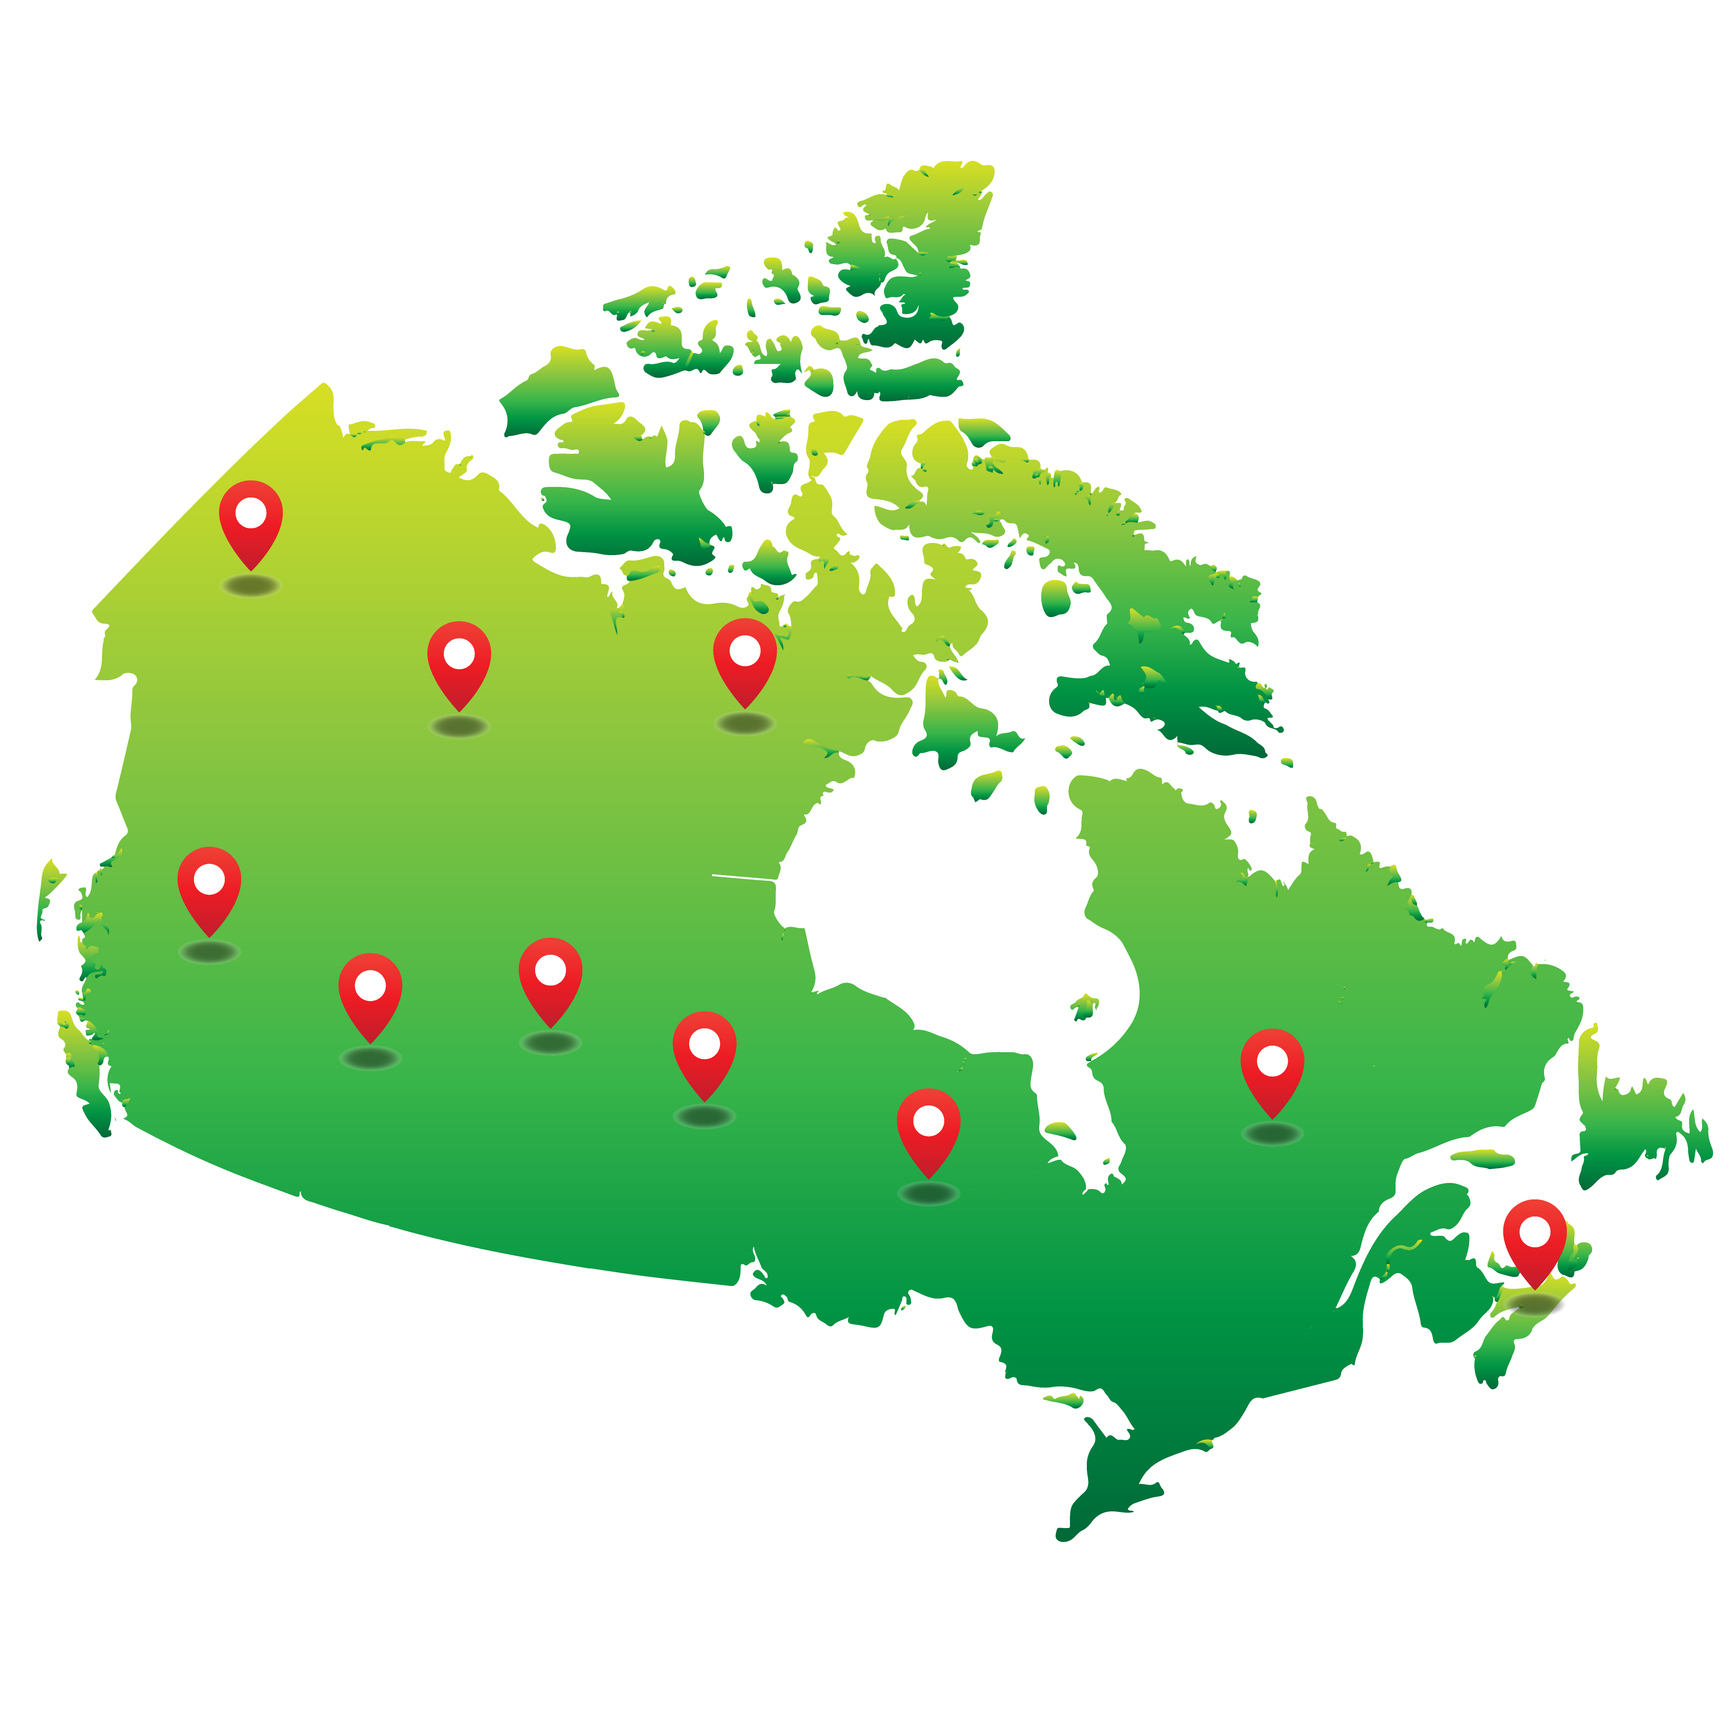 Pins on a map of Canada representing geotargeting.